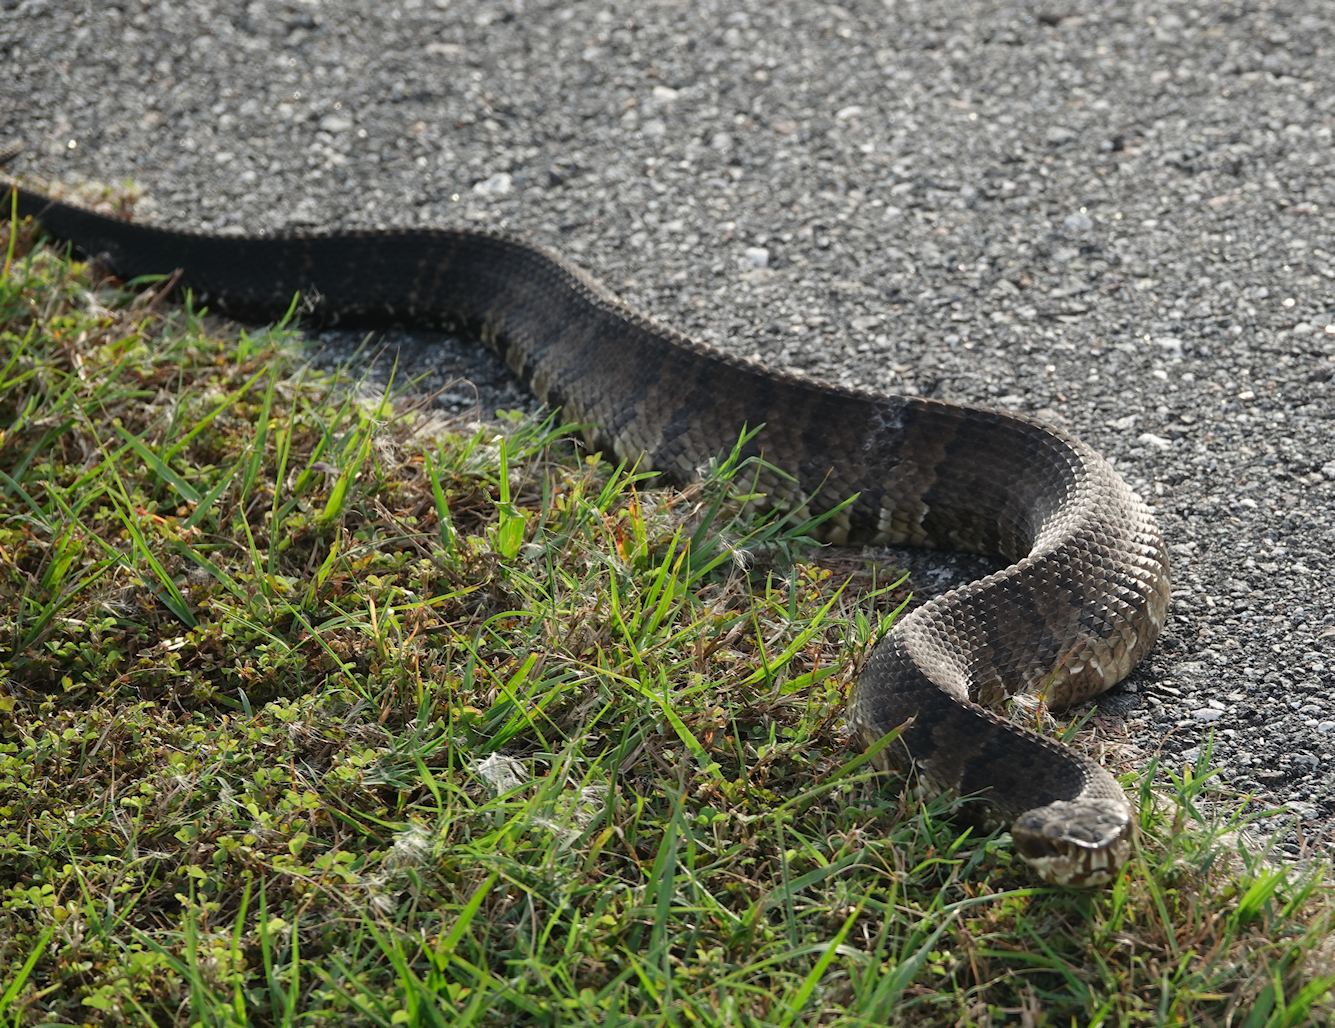 CottonMouth